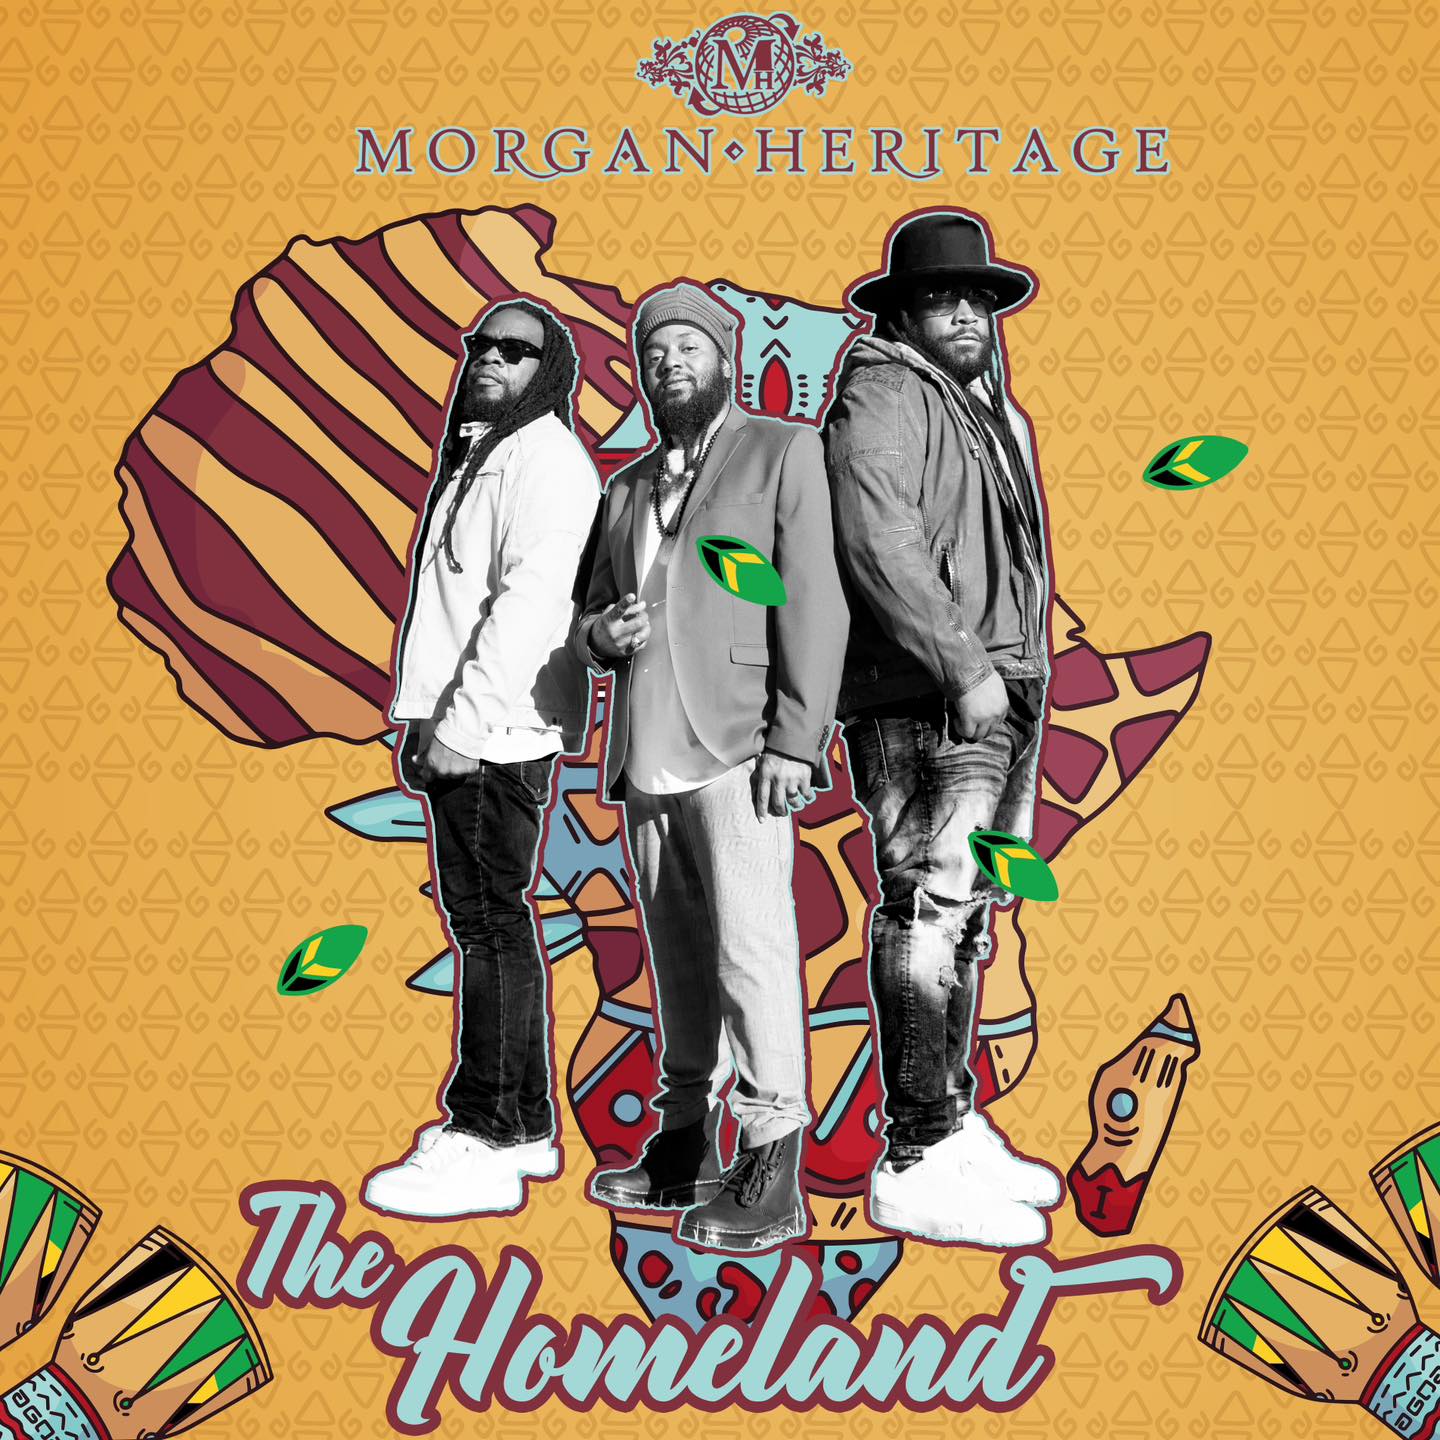 Grammy Award Winning Music Group Morgan Heritage Collaborates With Macky 2, Cleo ice Queen Alongside Kekero (Read More)